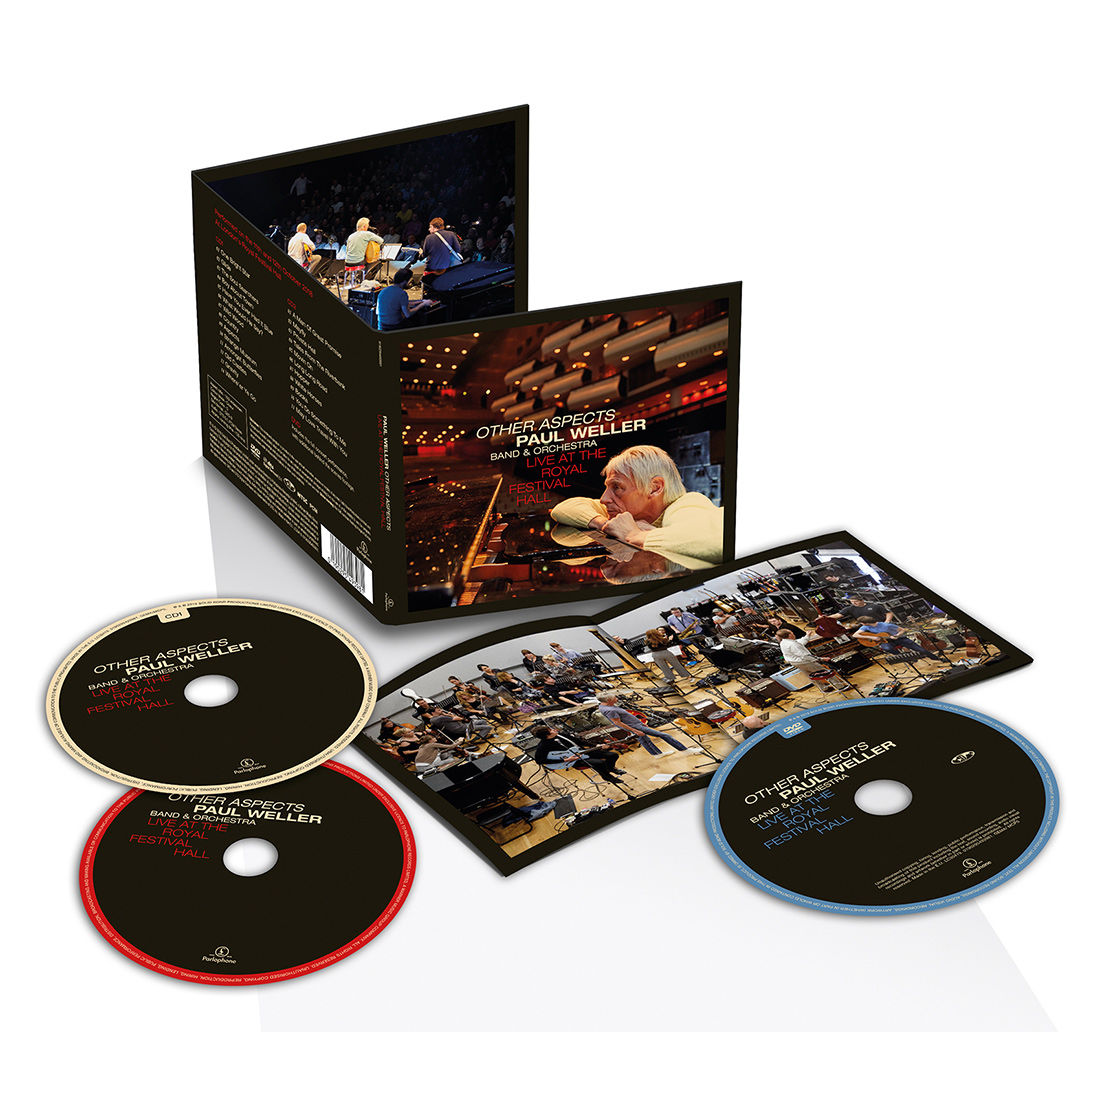 Paul Weller - Other Aspects, Live At The Royal Festival Hall: 2CD + DVD